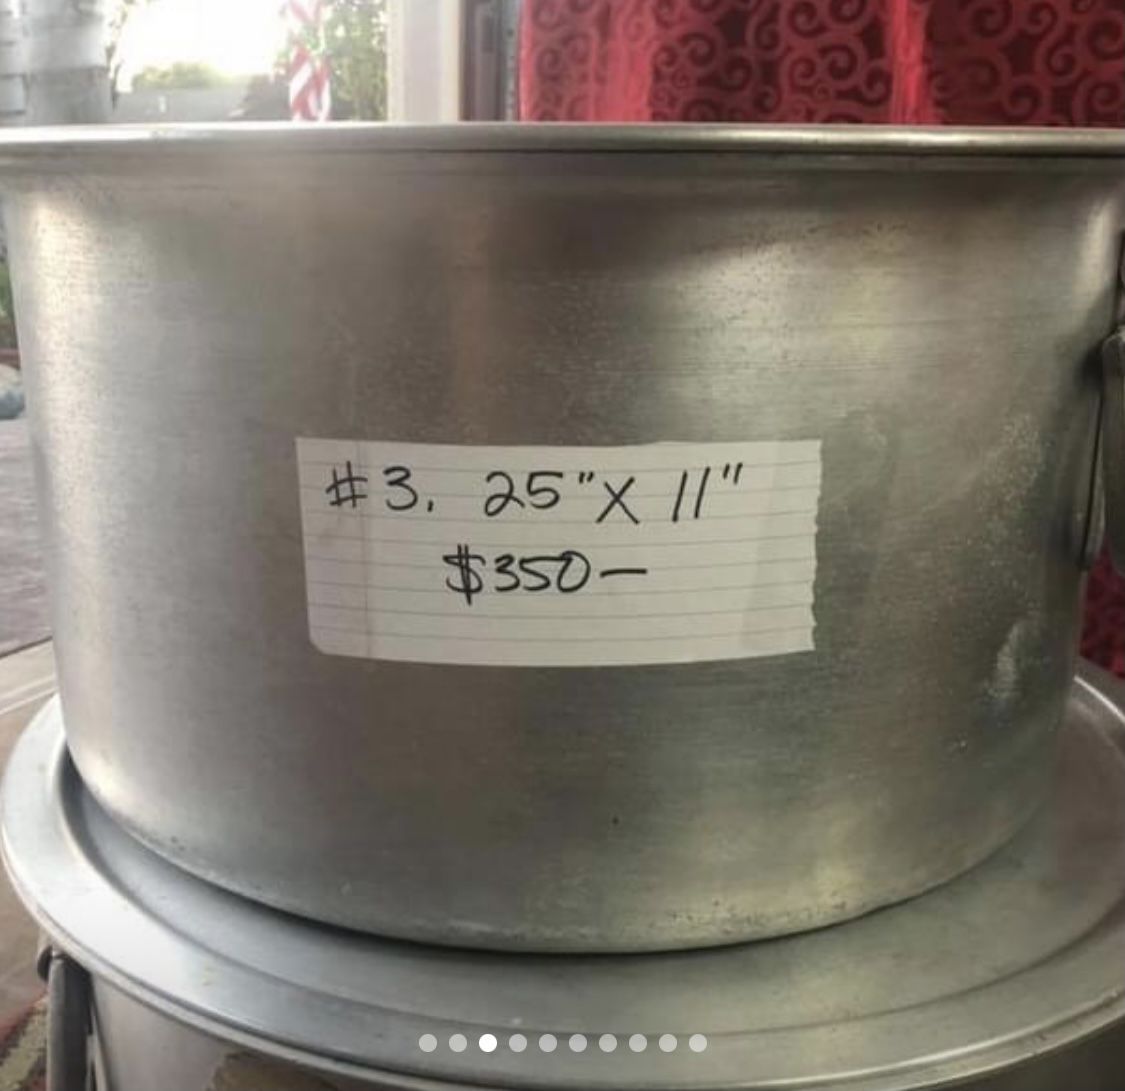 Commercial Big Pots for Sale in Modesto, CA - OfferUp